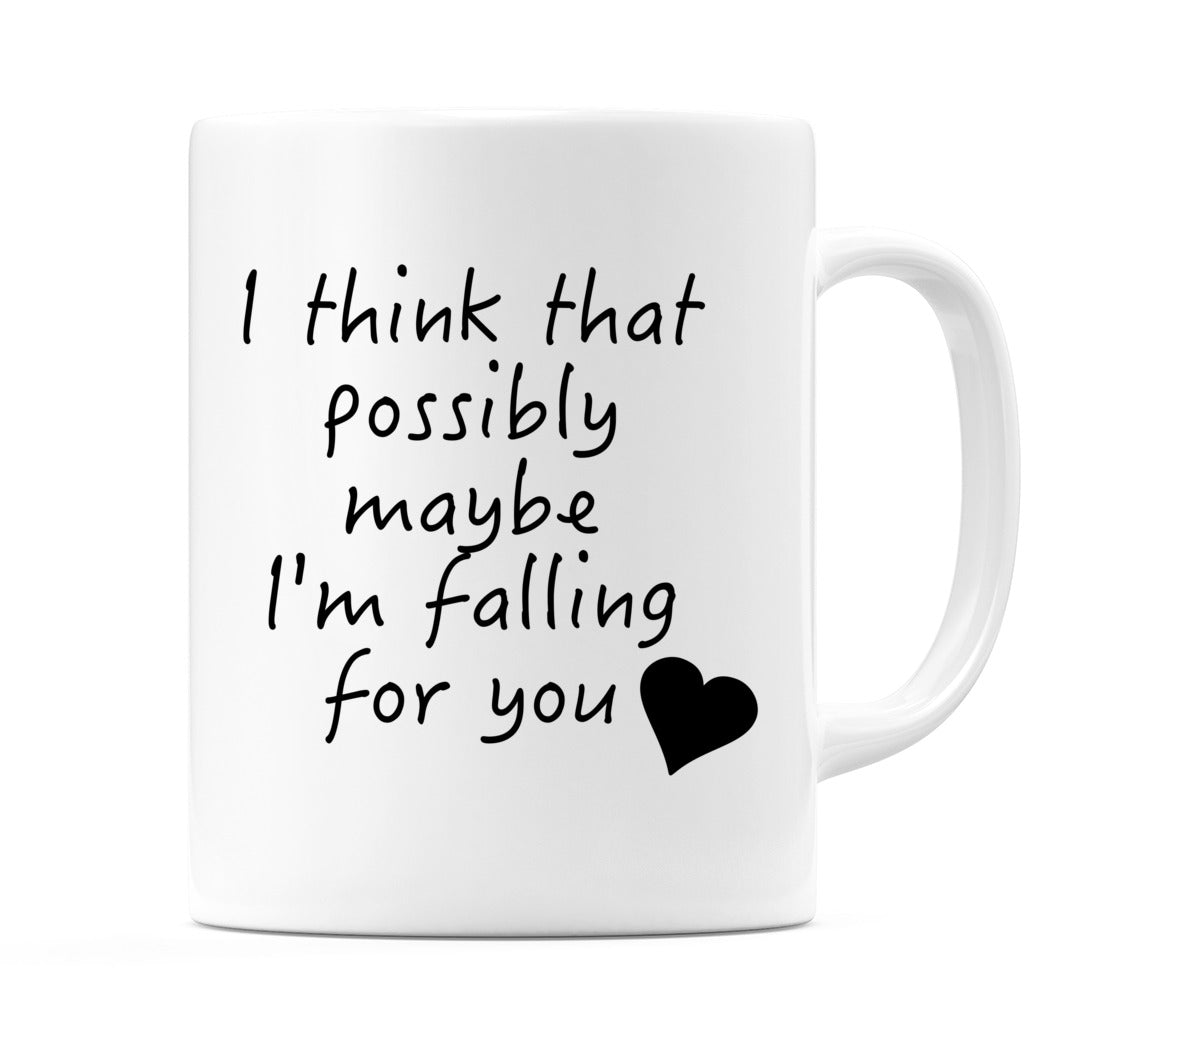 I think that possibly maybe I'm falling for you Mug